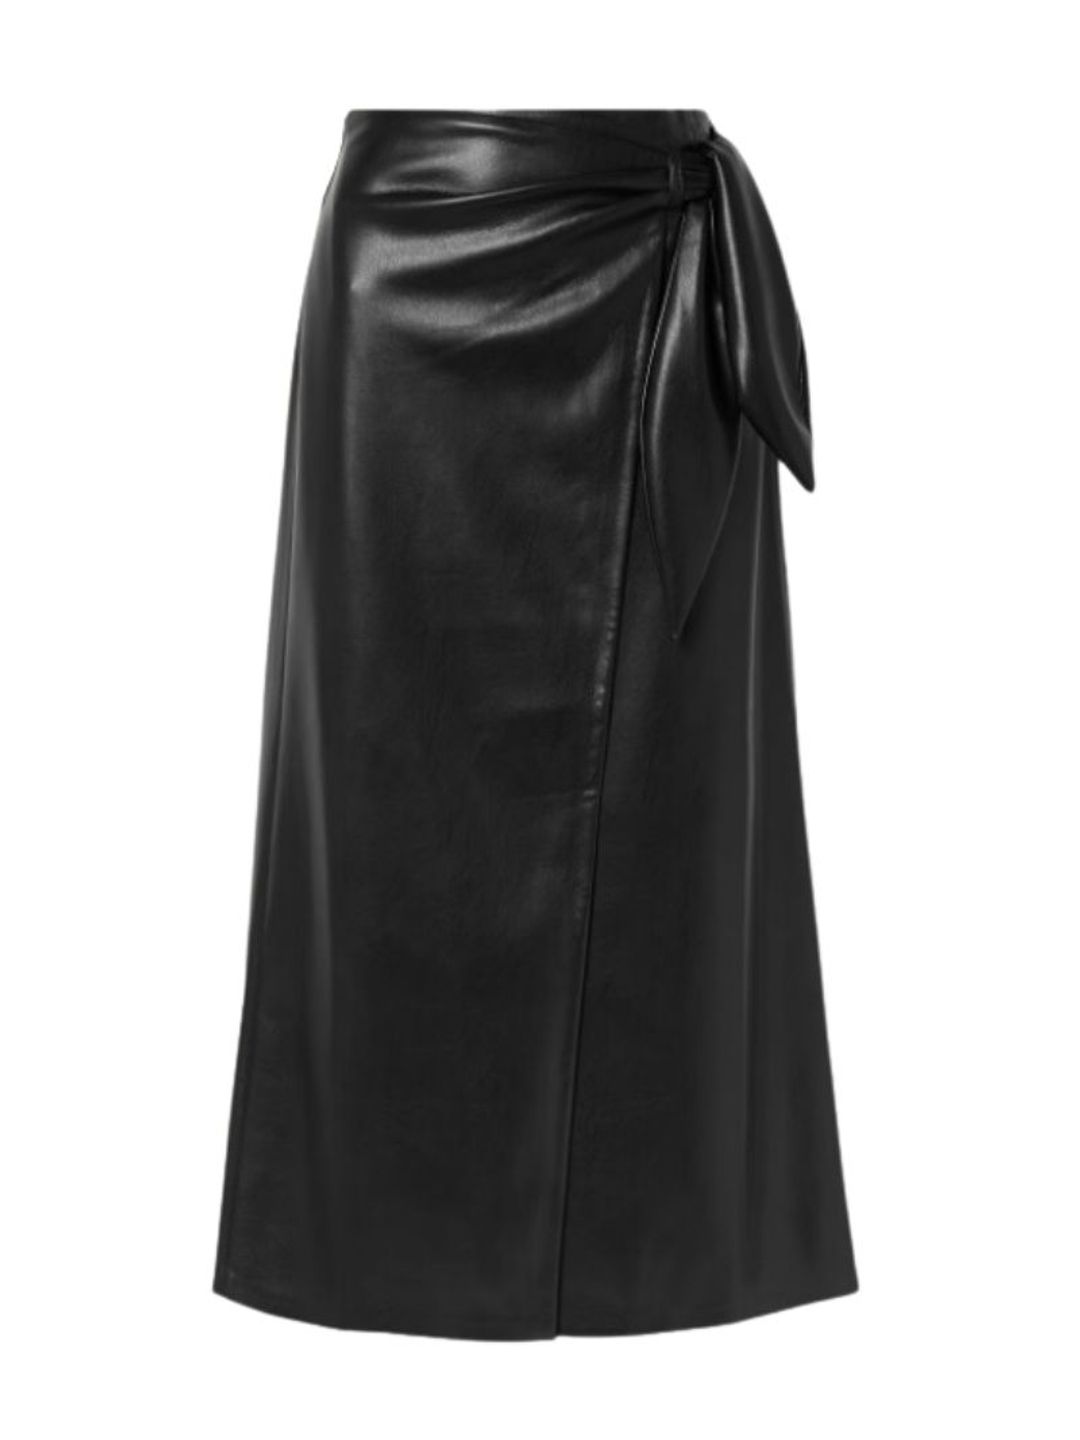 Black leather midi skirt with knot tie 